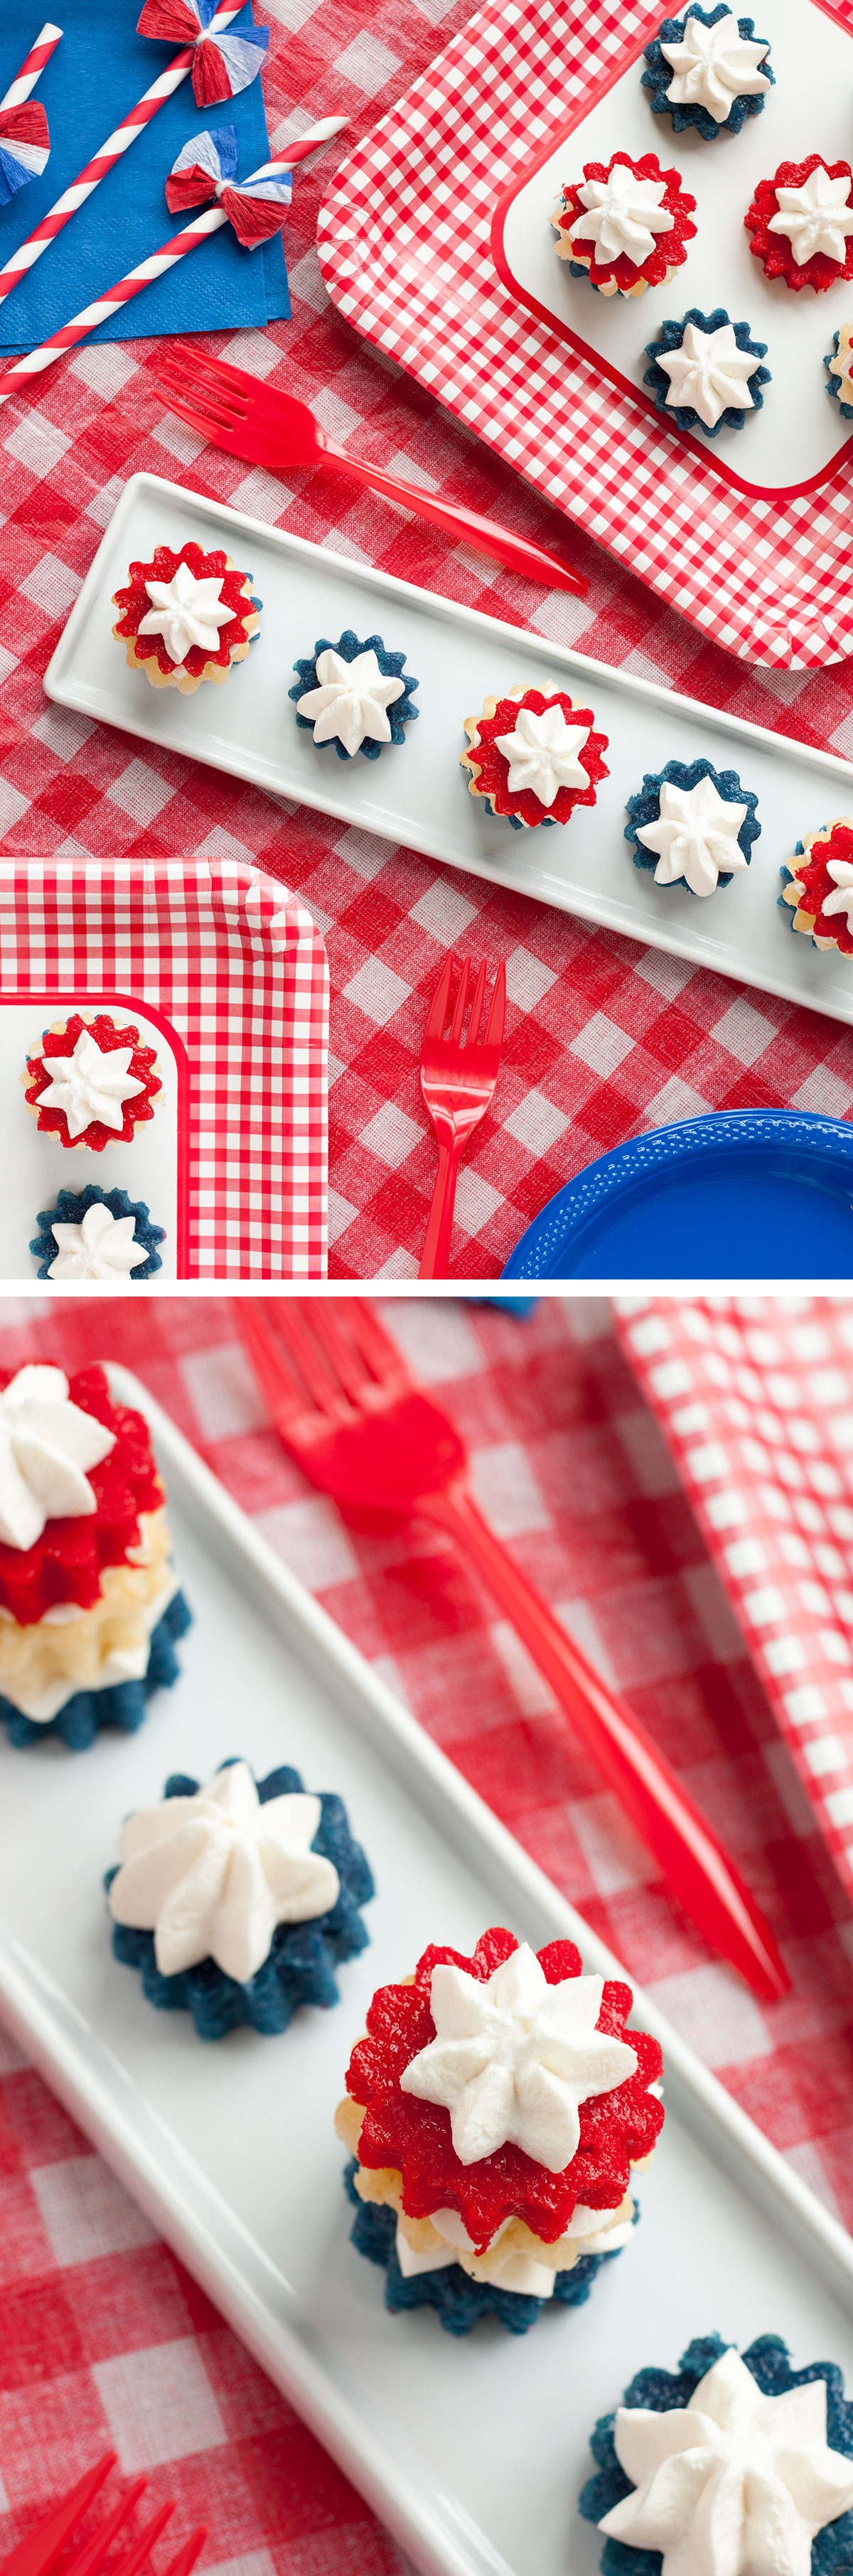 Mini firework cakes for 4th of July!